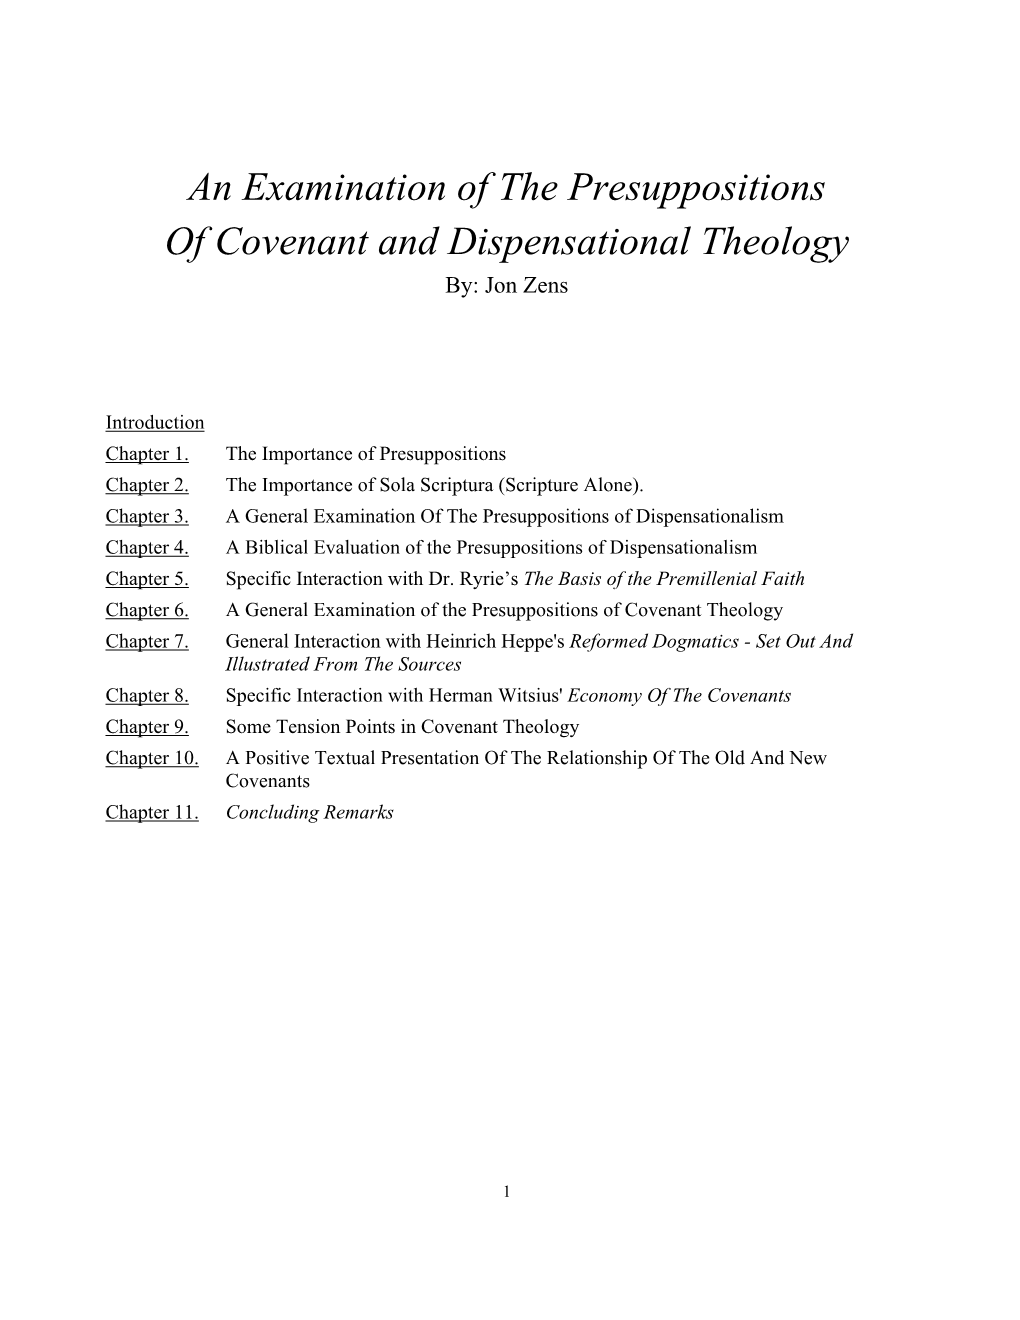 An Examination of the Presuppositions of Covenant and Dispensational Theology By: Jon Zens